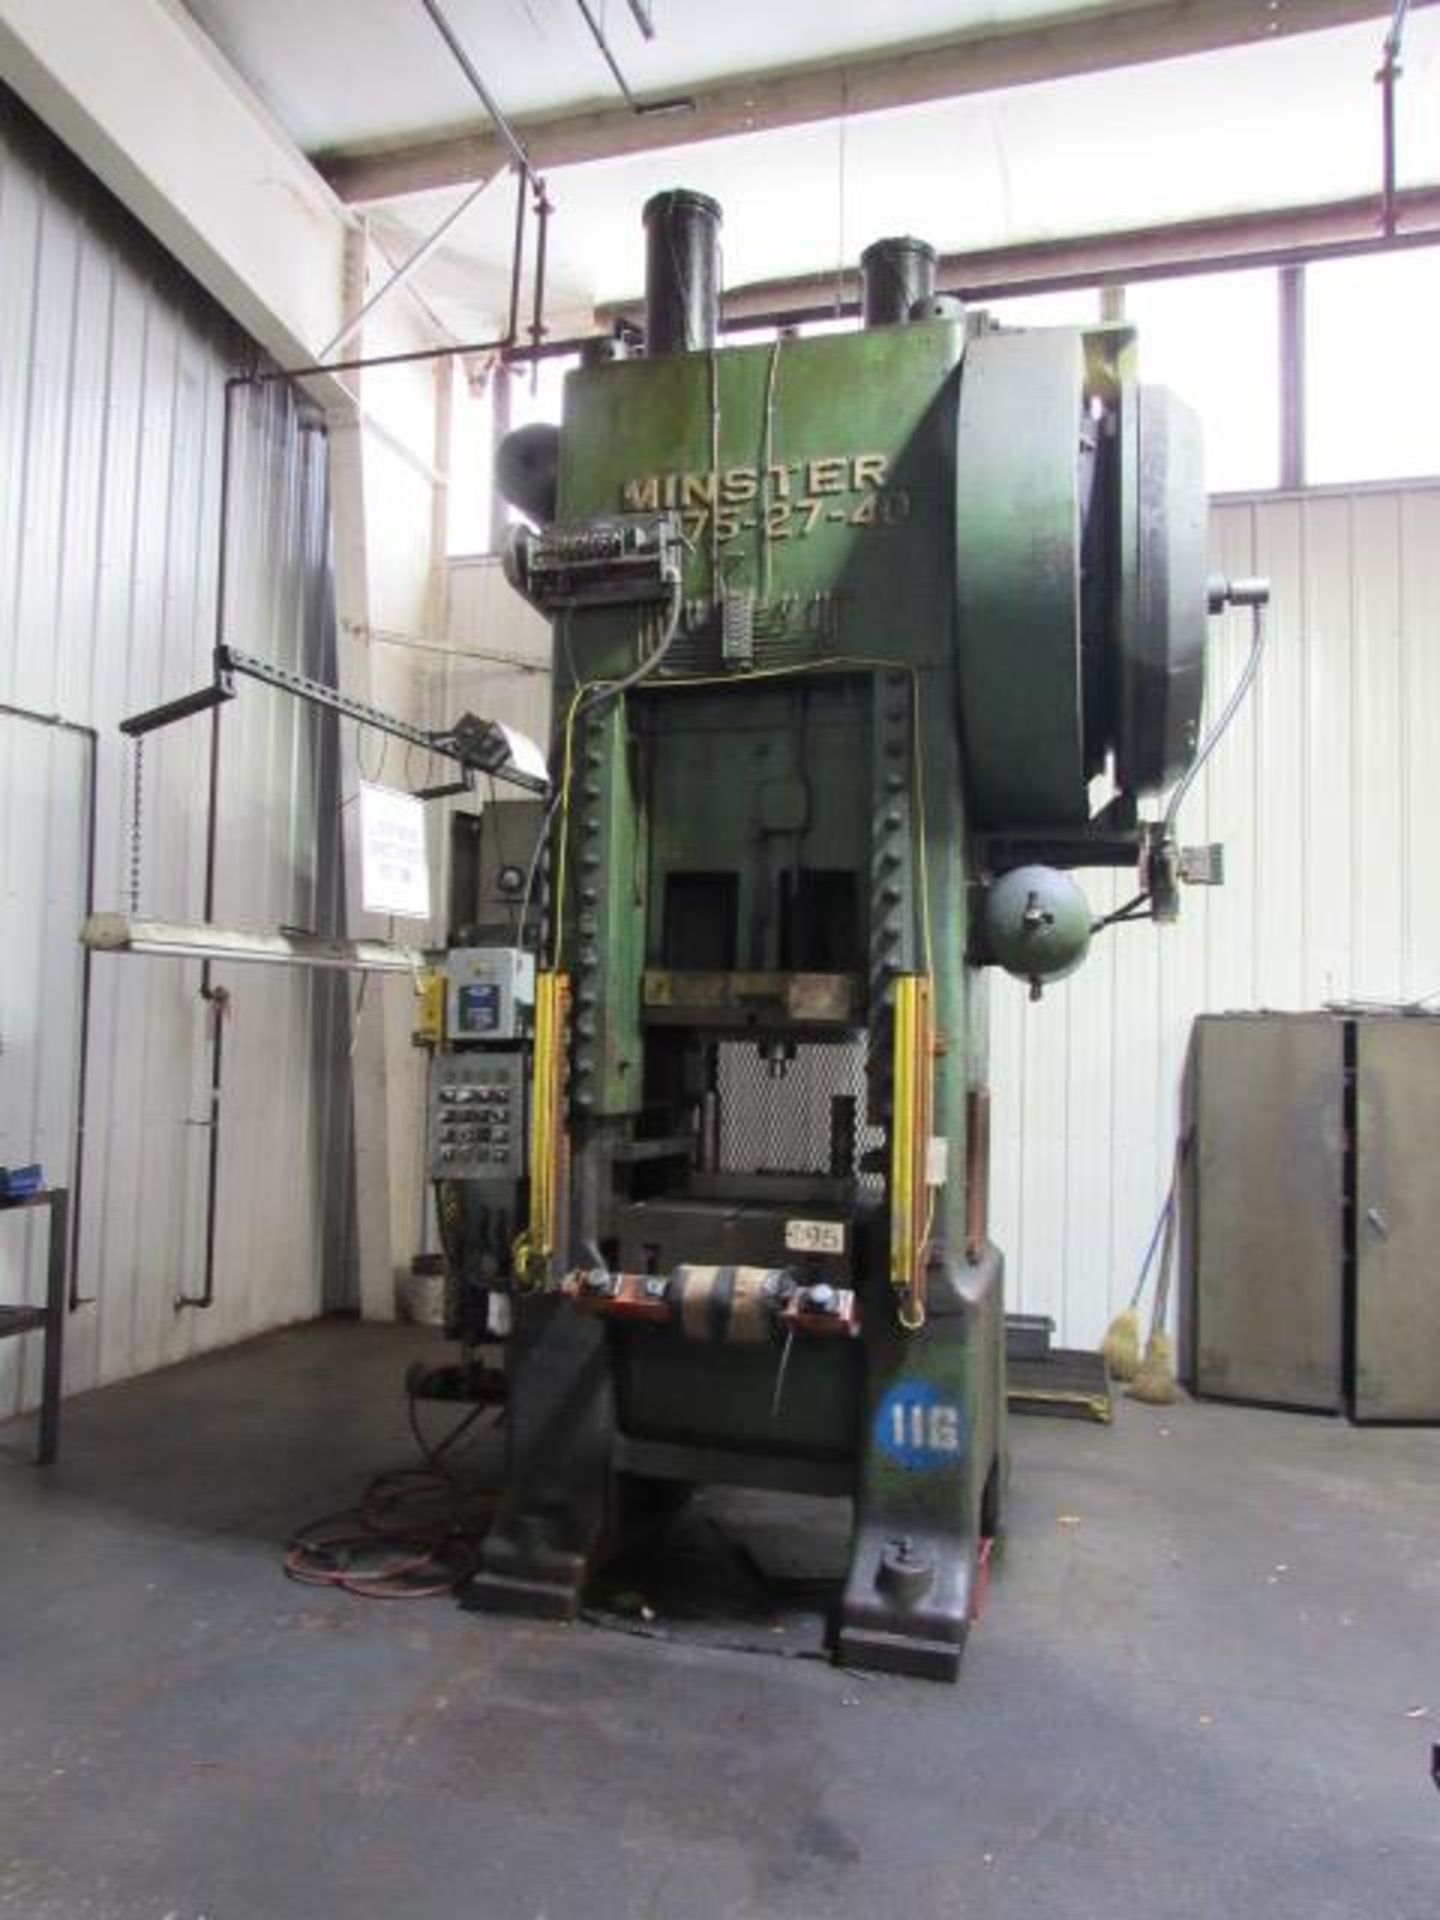 Minster Model S1-175-27-40 75 Ton Coining Press